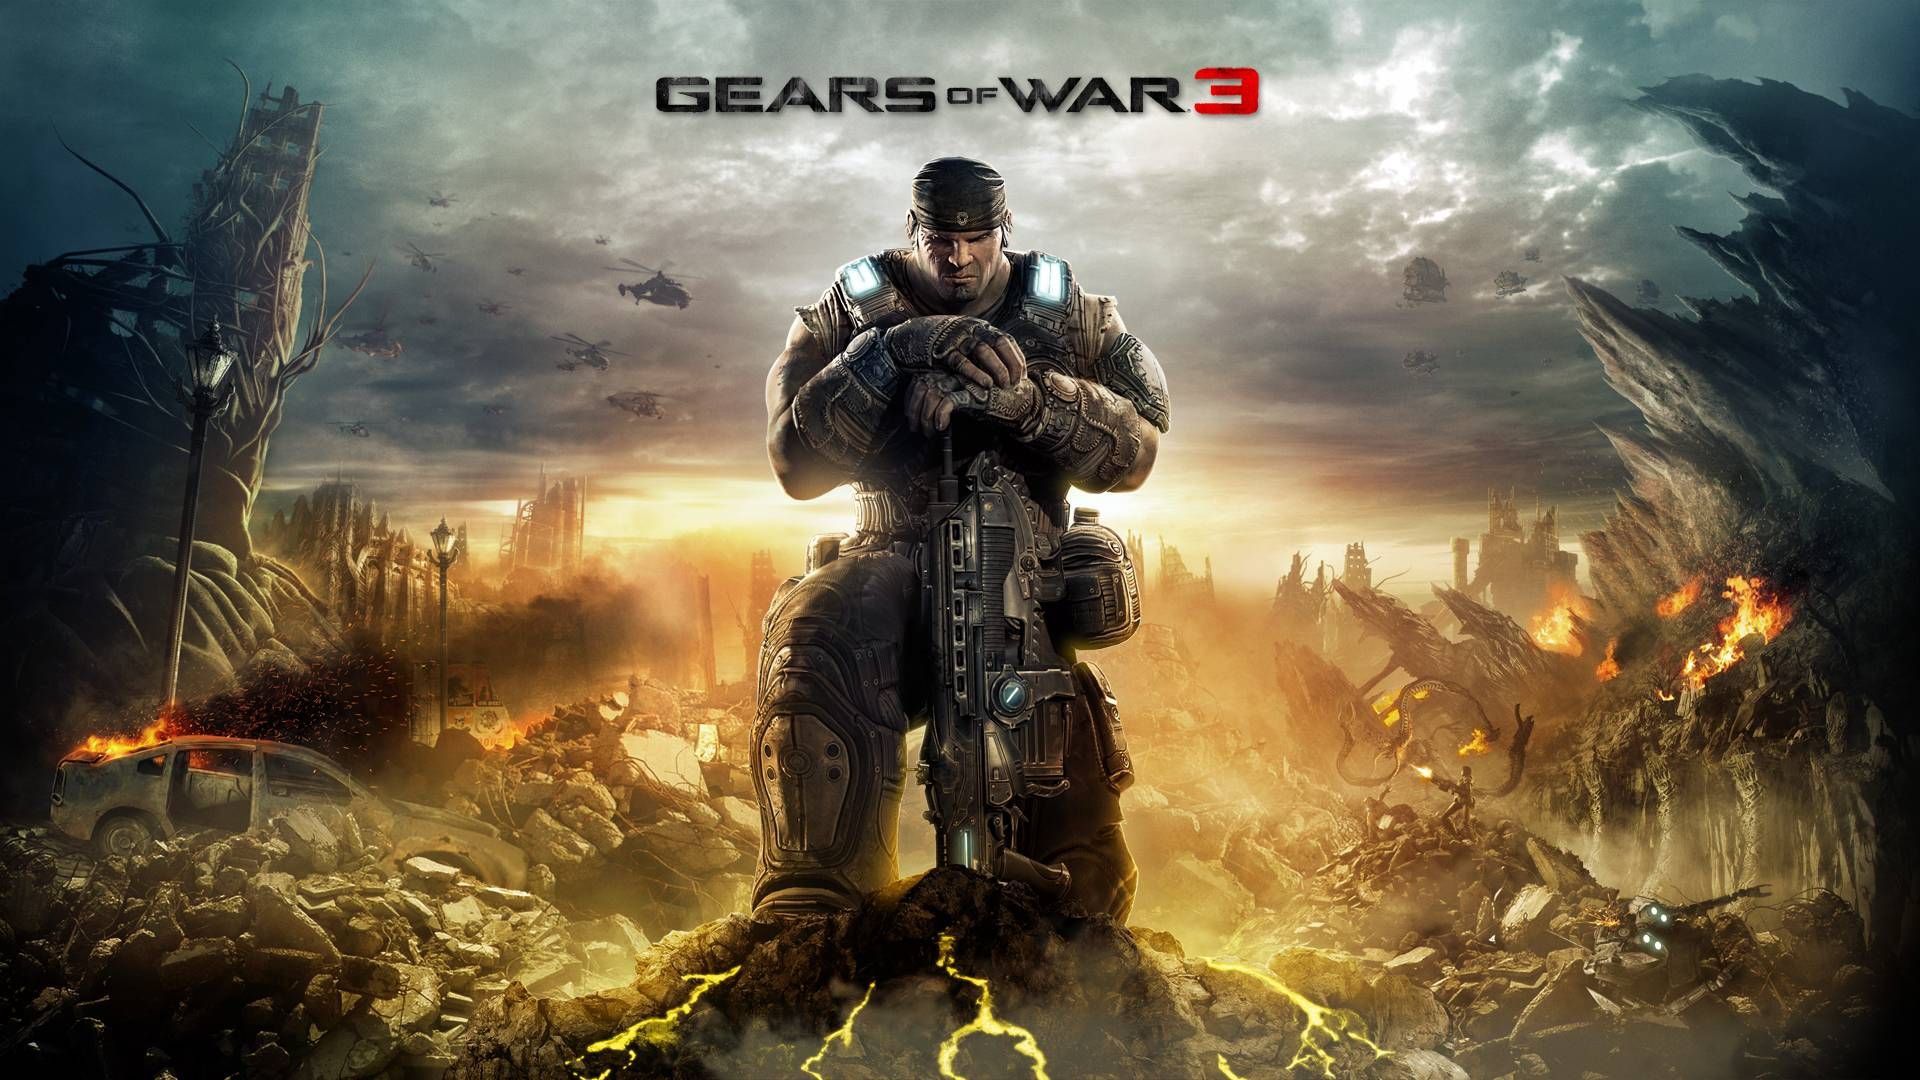 10-years-later-gears-of-war-3-remains-a-fitting-conclusion-to-the-trilogy